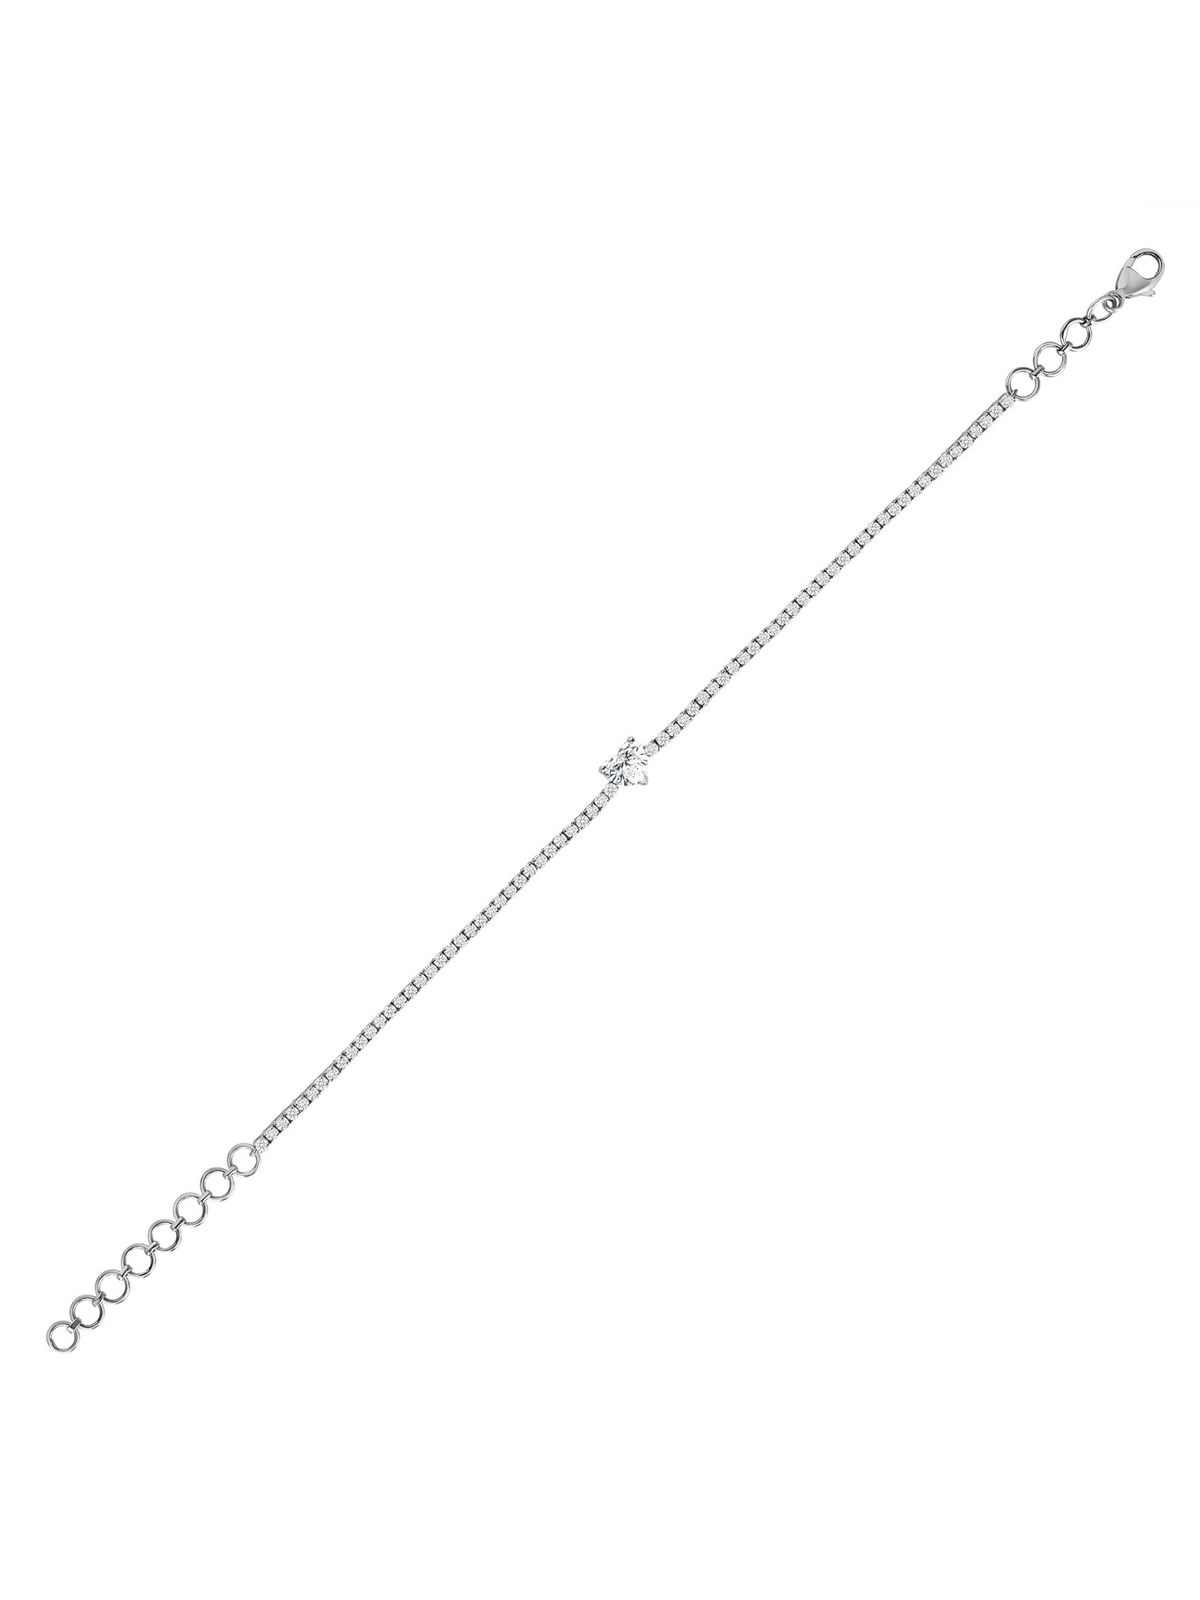 white gold tennis bracelet with solitaire heart cut diamond centered 